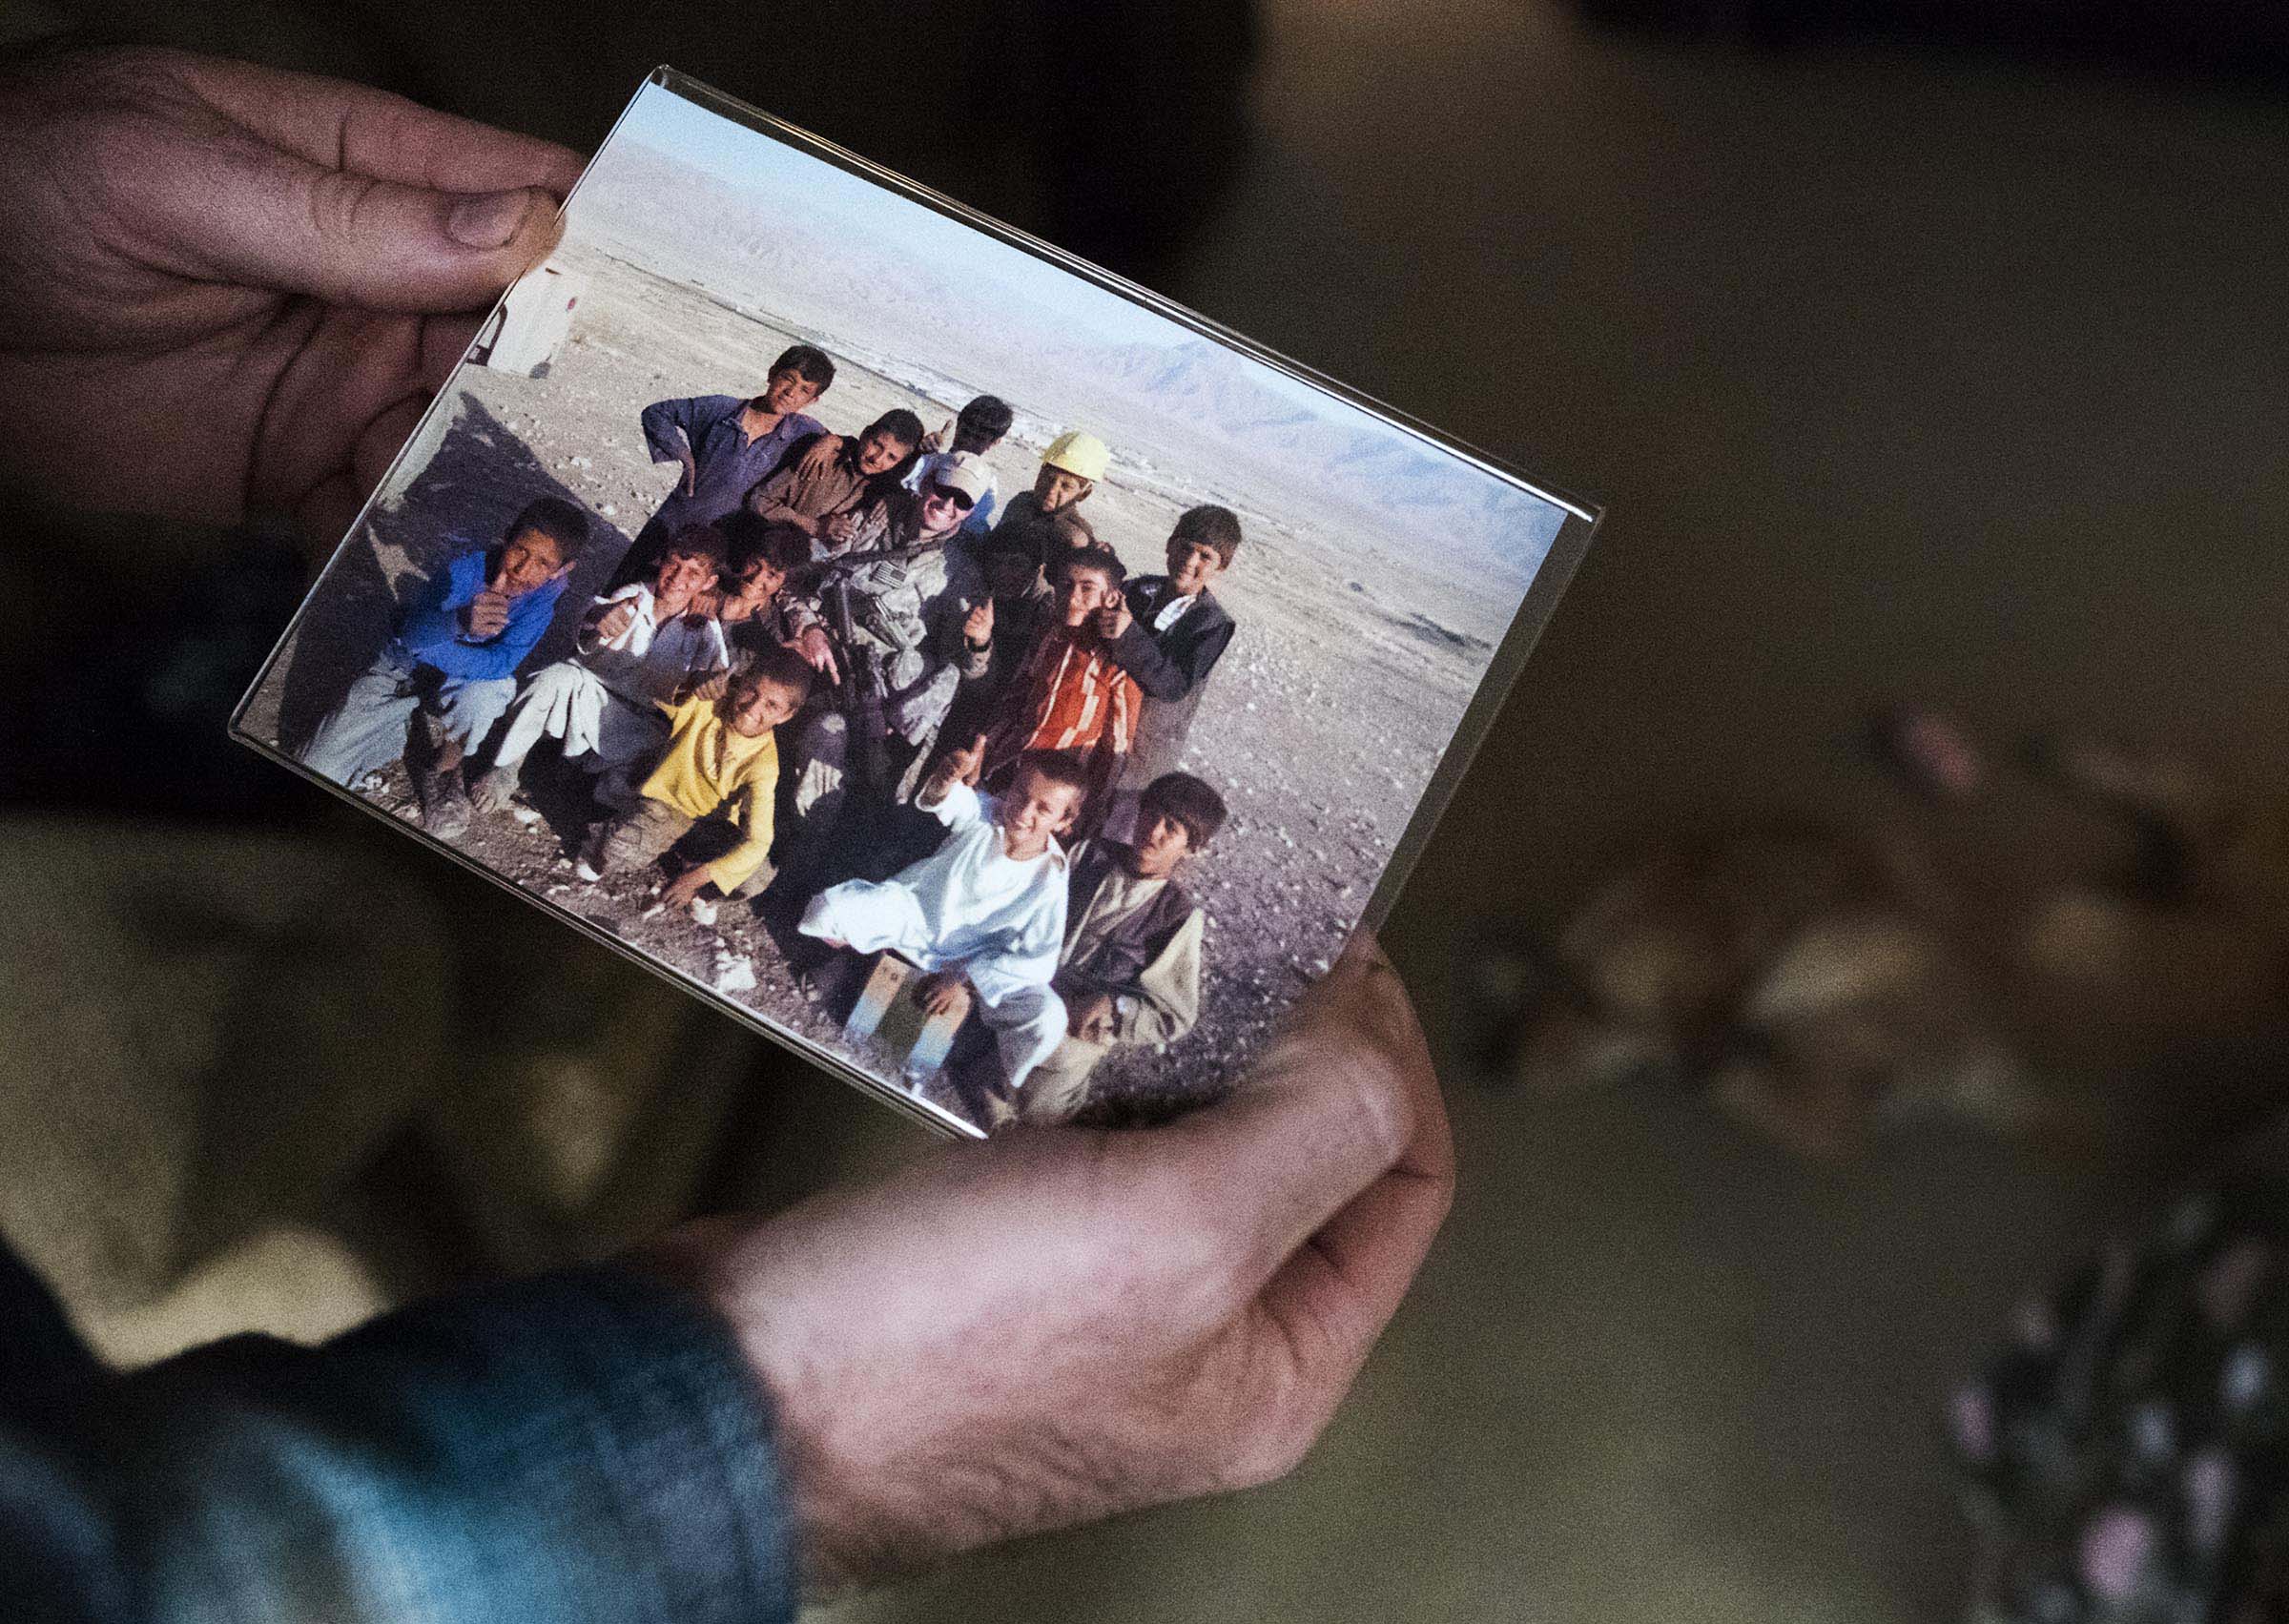 Adam holds his favorite photograph from his time in Afghanistan. In the photograph Adam is surrounded by local children, who he really felt connected to during his deployment.